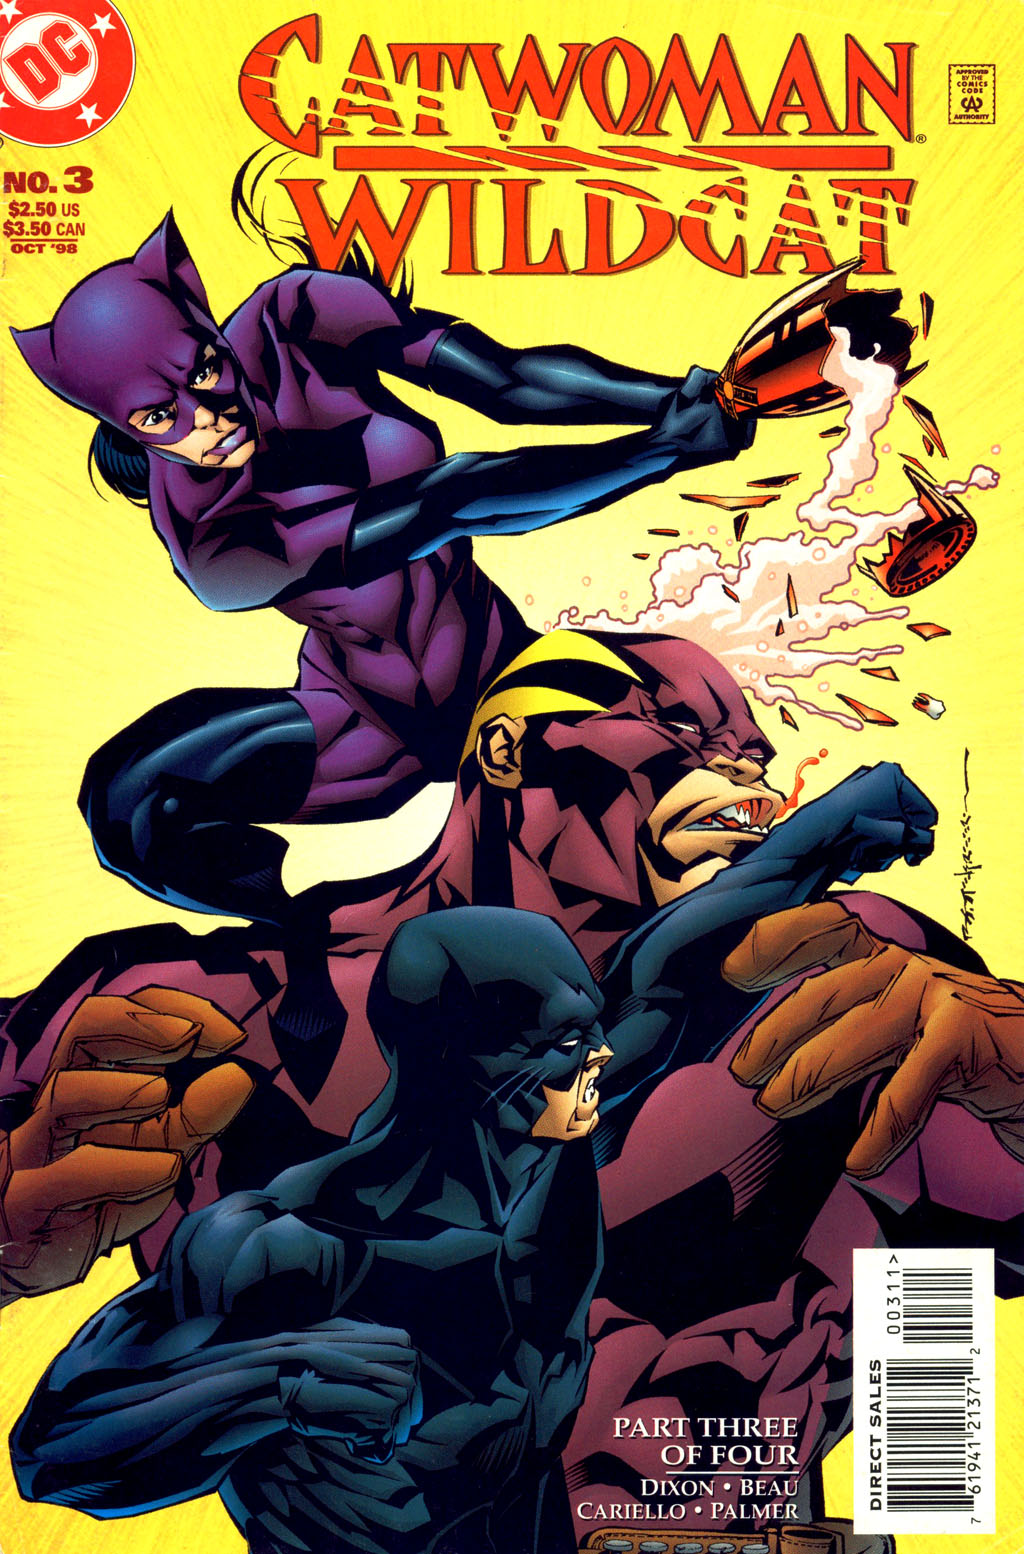 Read online Catwoman/Wildcat comic -  Issue #3 - 1